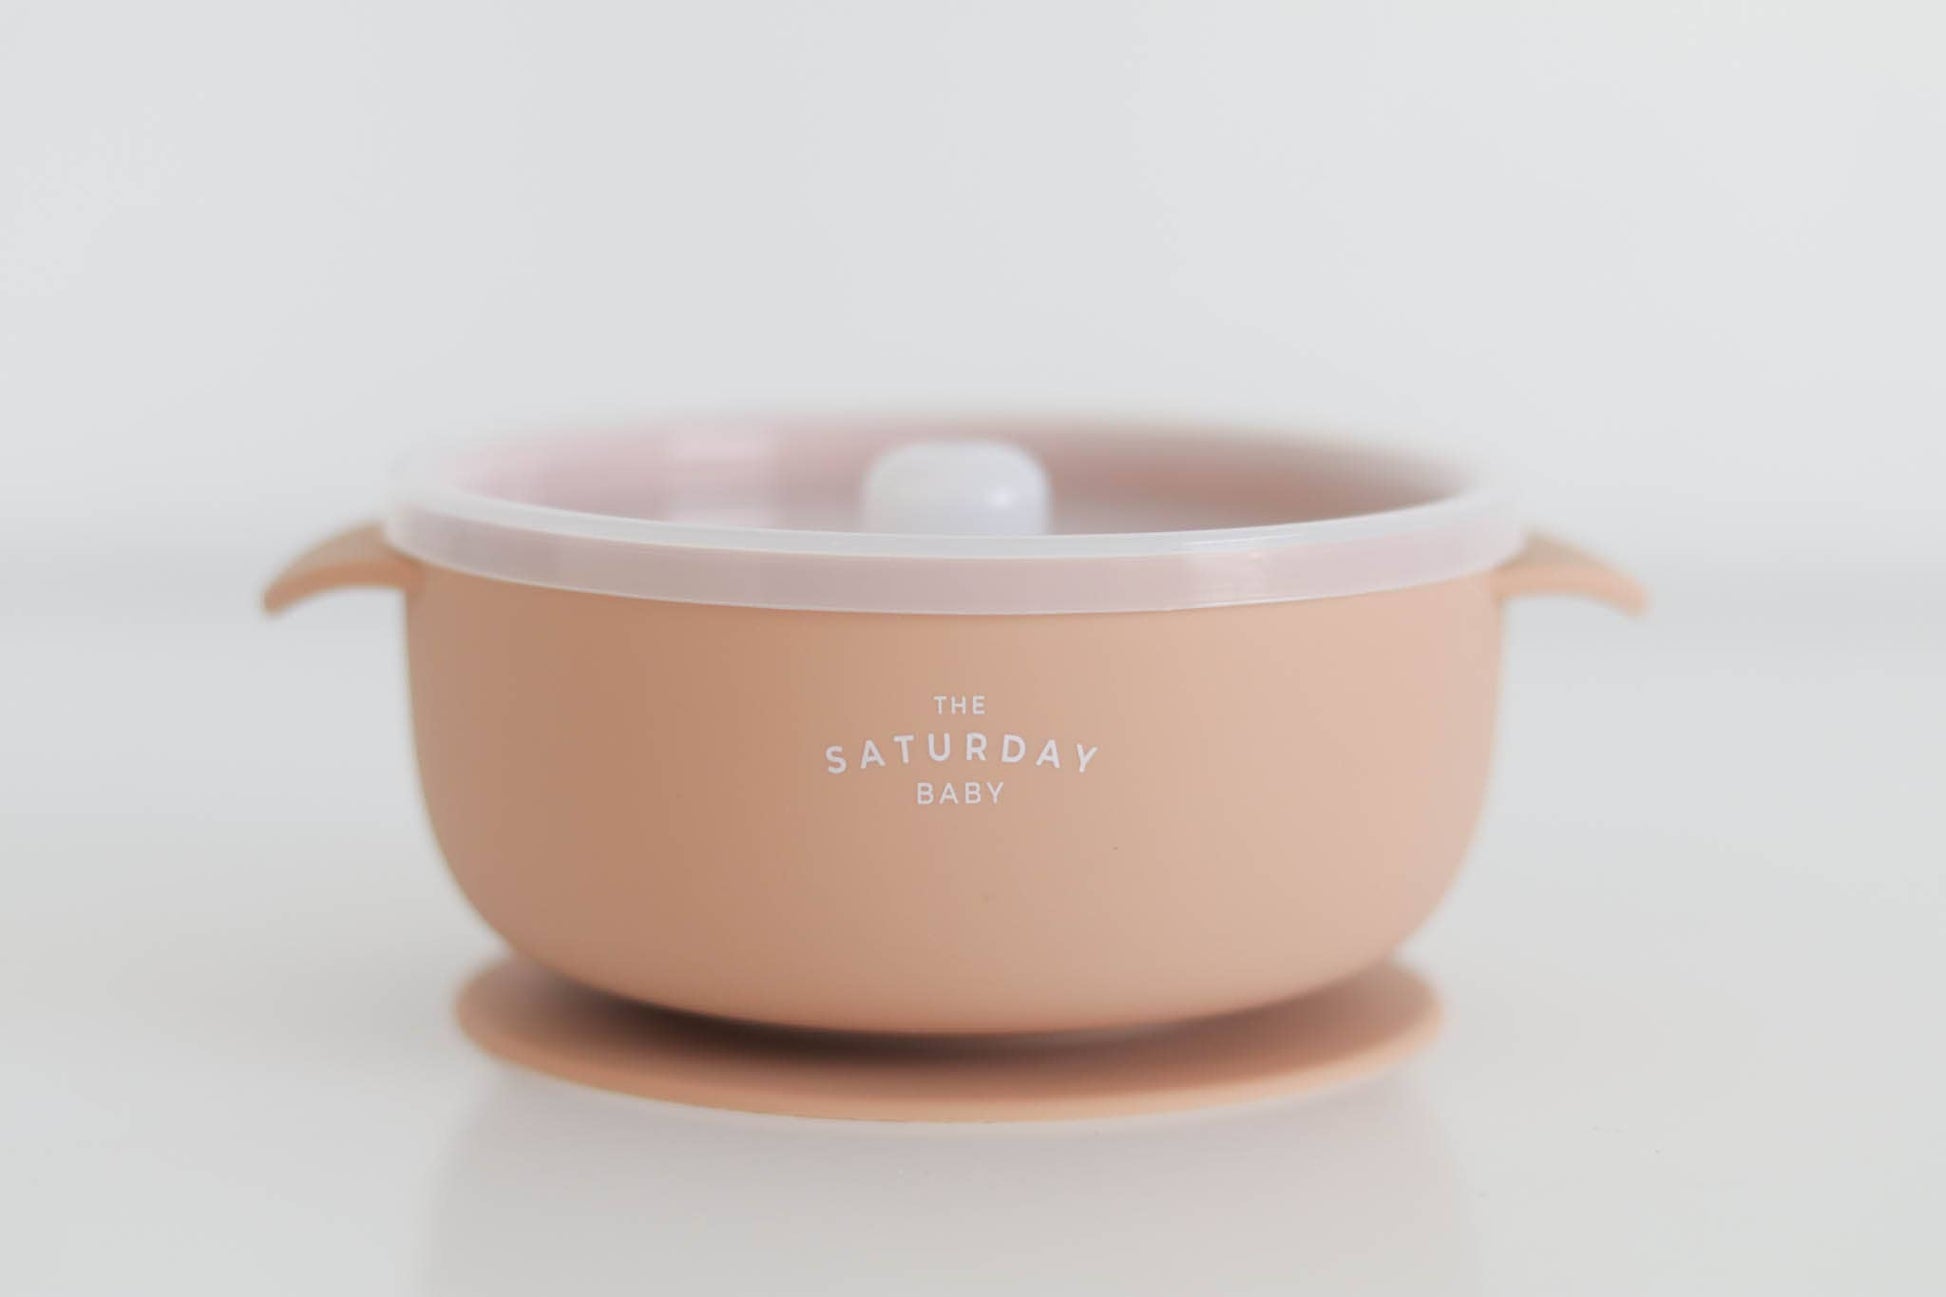 The Saturday Baby - Suction Bowl With Lid (7426903965874)